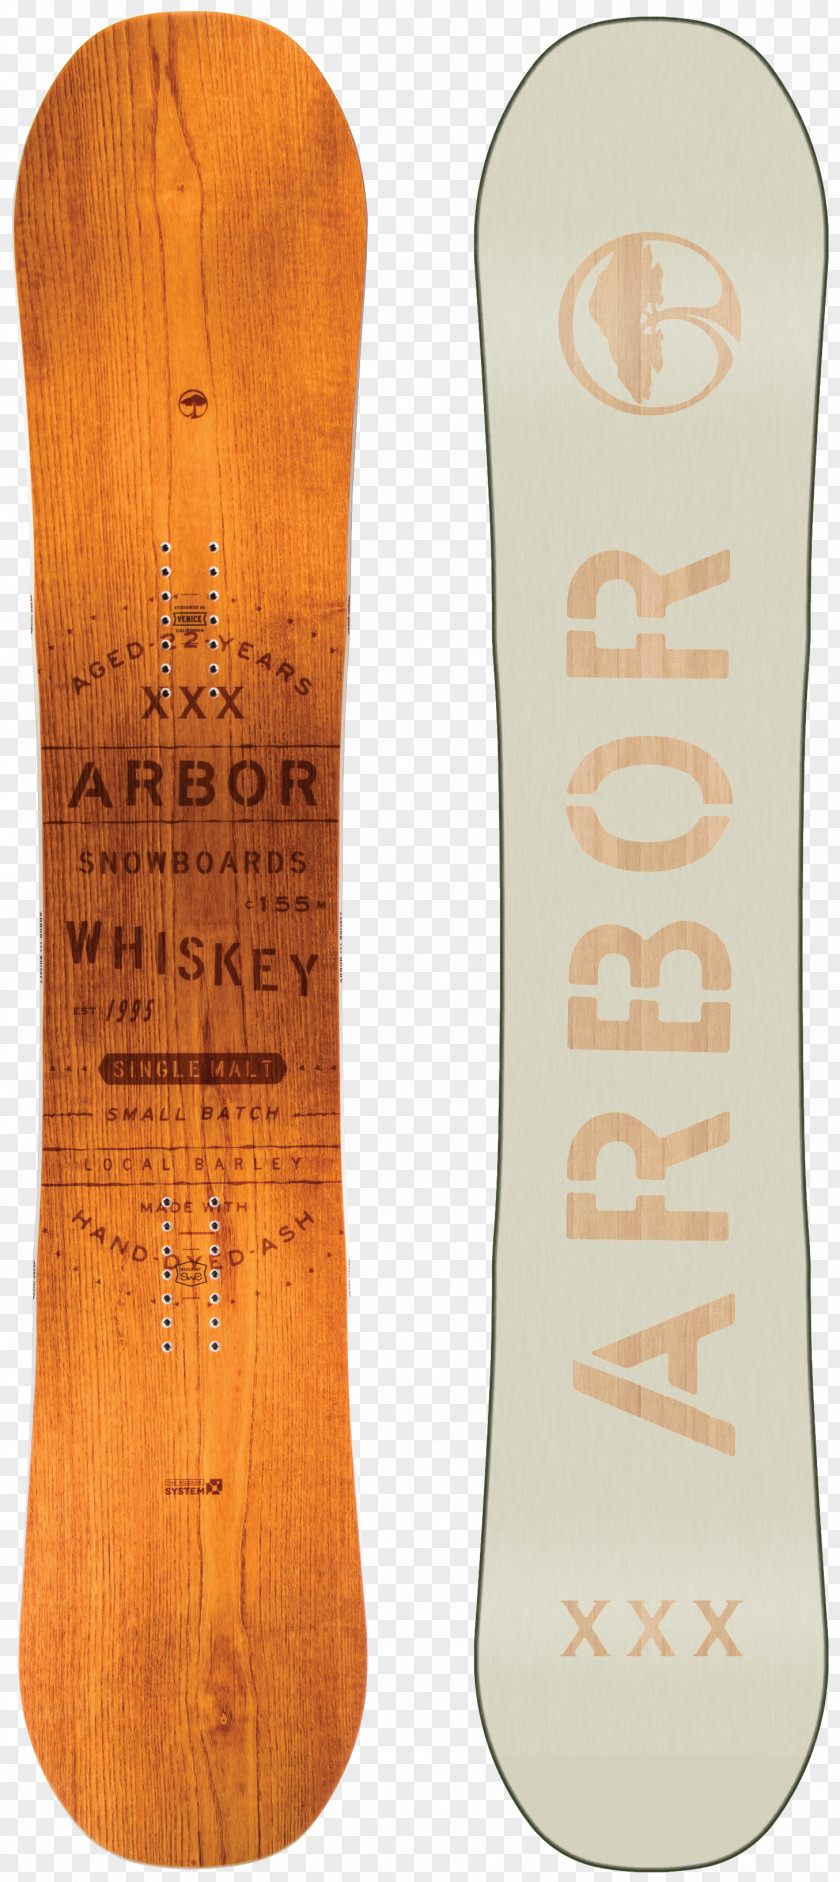 Arbor Day 312 Snowboarding Whiskey (2016) Lib Technologies PNG